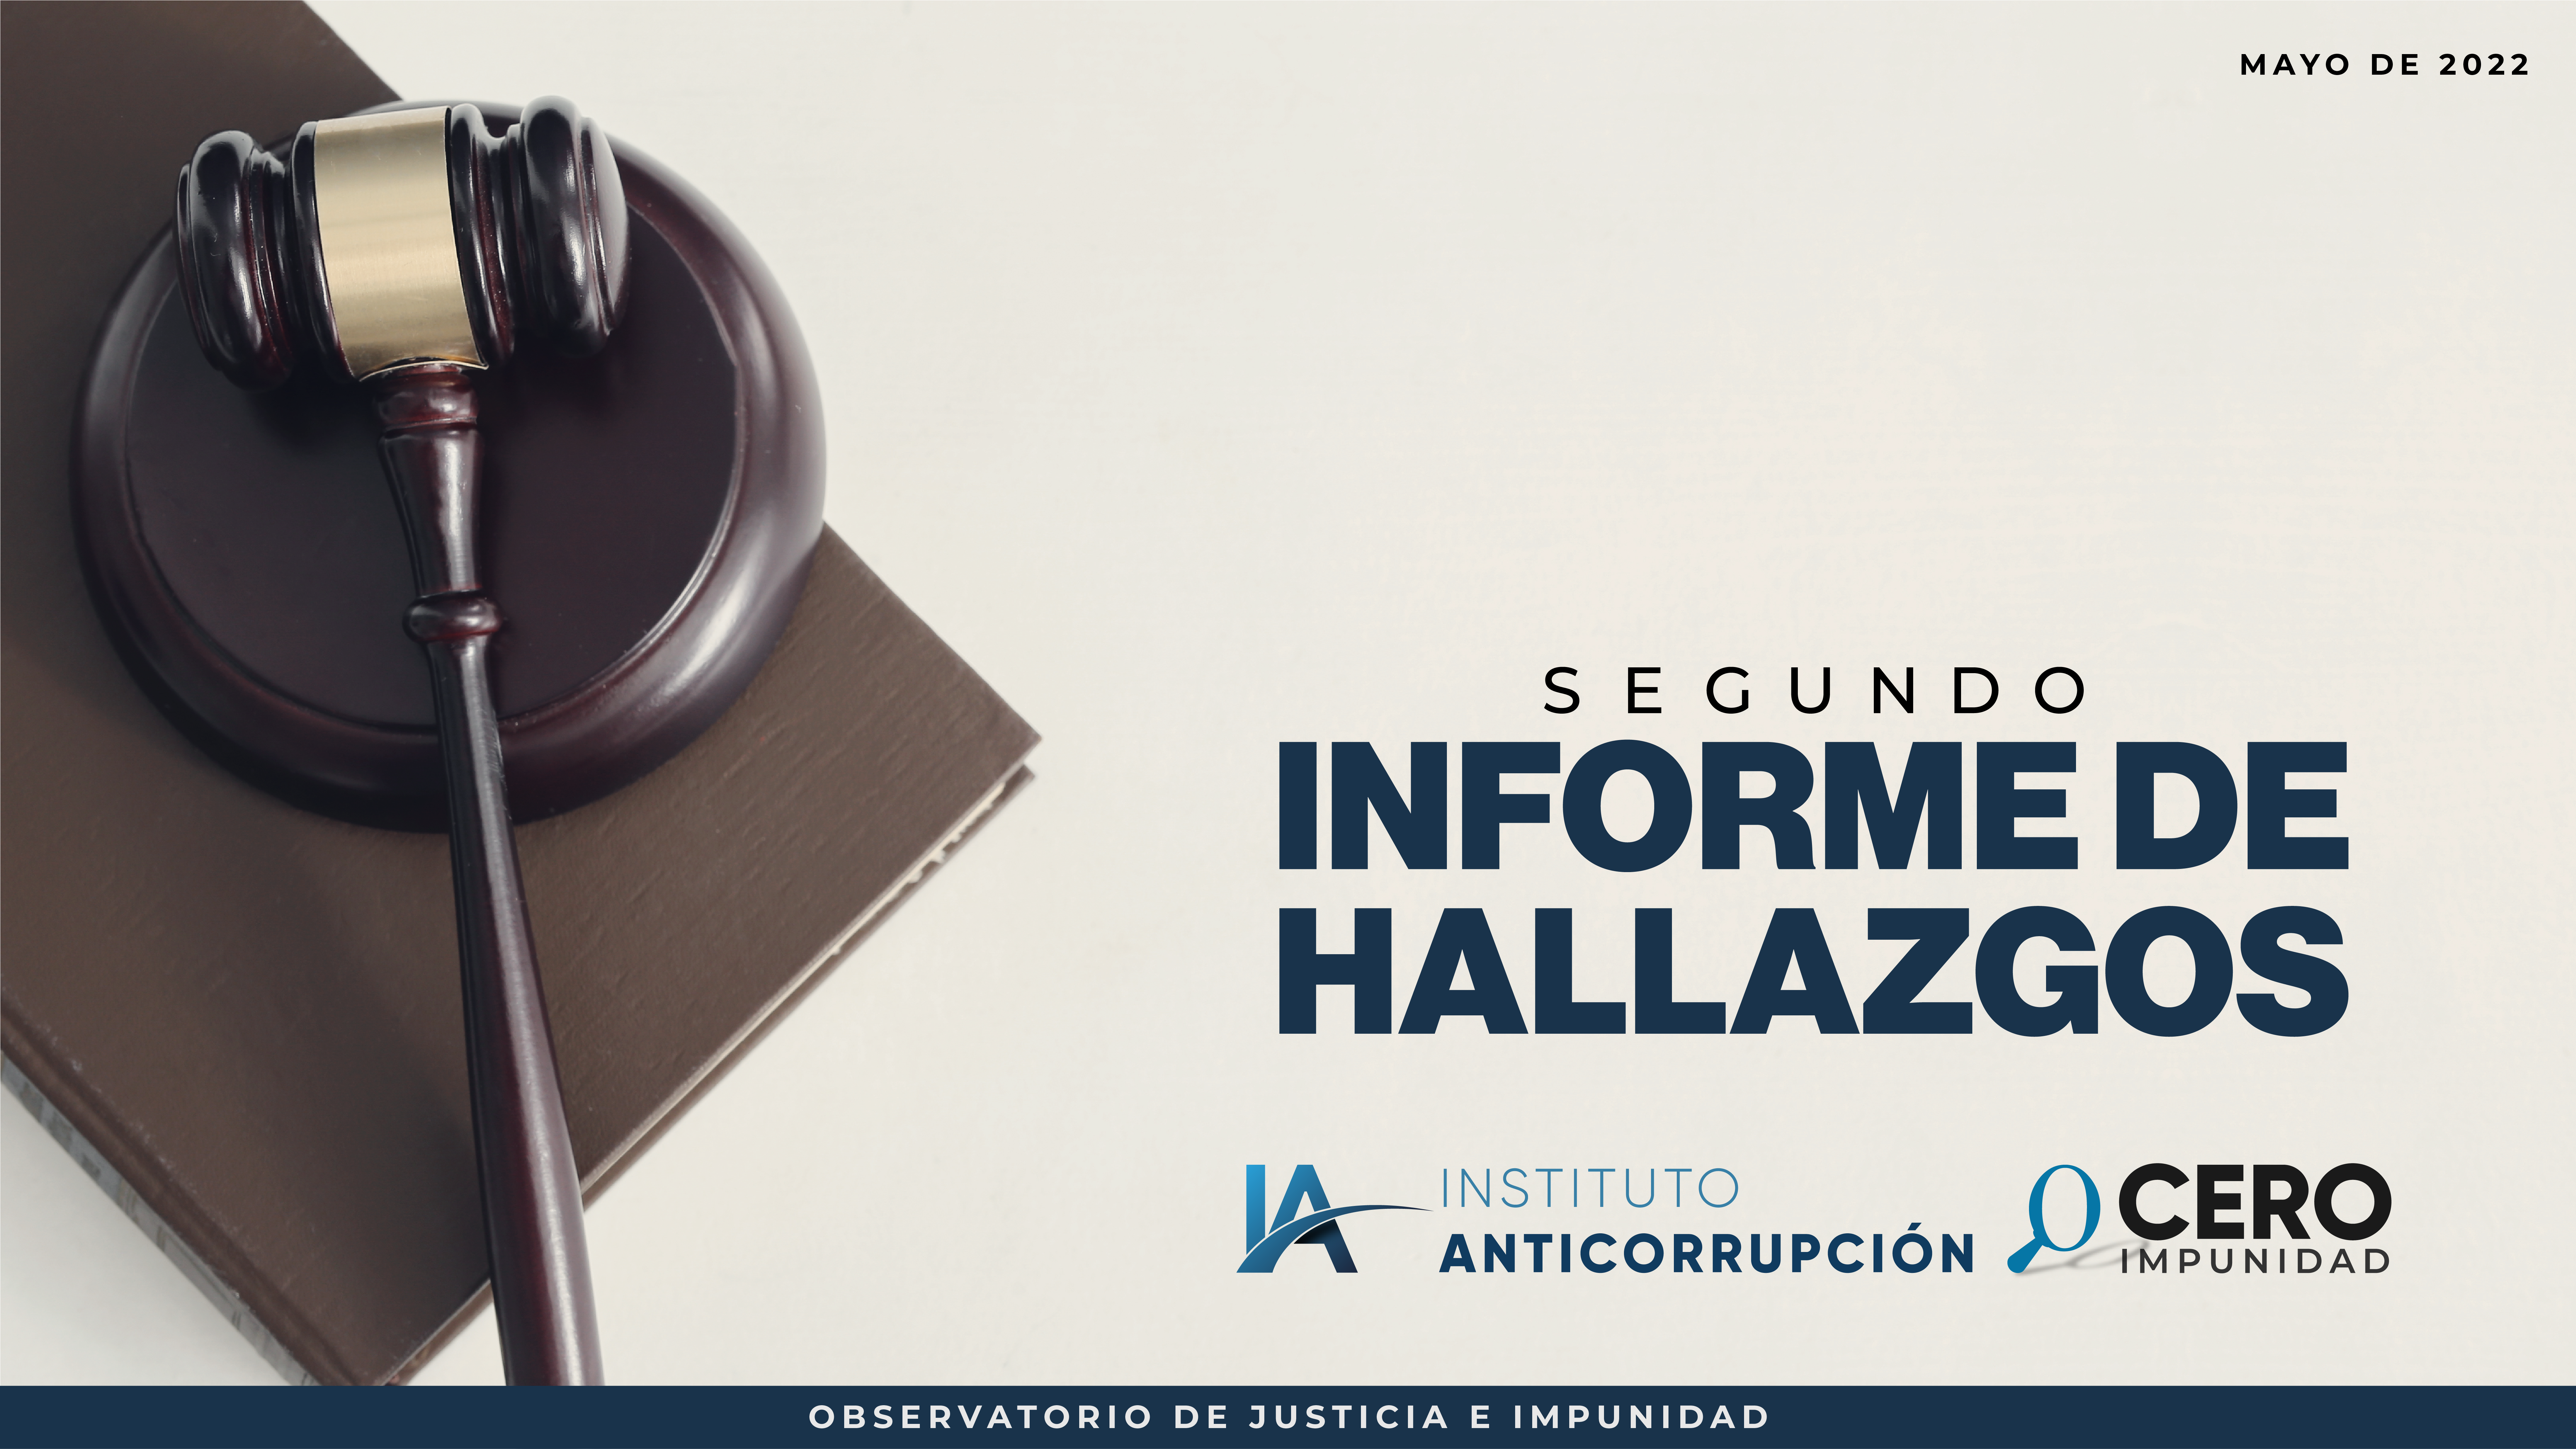 Findings on the sentences of parapoliticians by the Supreme Court of Justice, judicial processes and rulings of fiscal responsibility by the Comptroller in Colombia